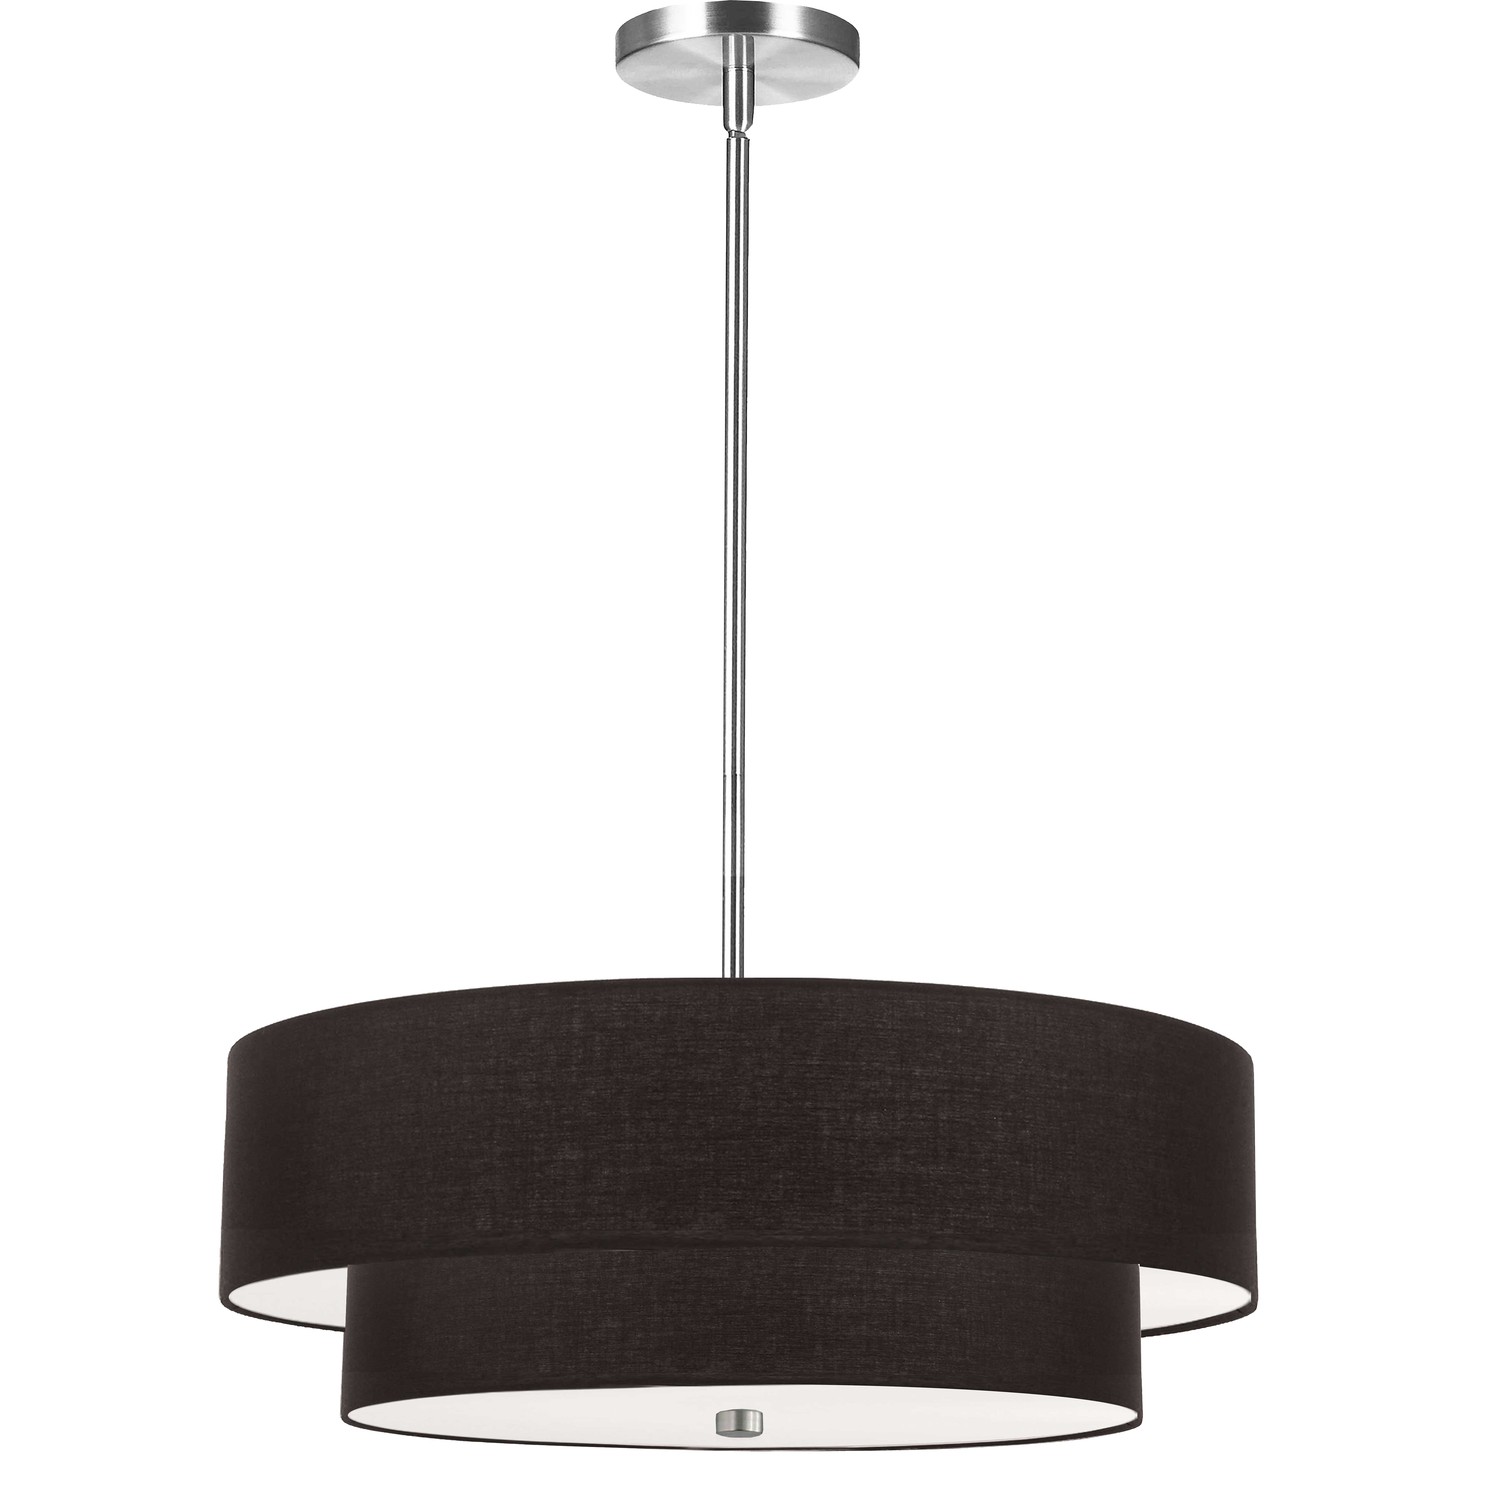 4 Light Incandescent 2 Tier Pendant, Polished Chrome with Black Shade